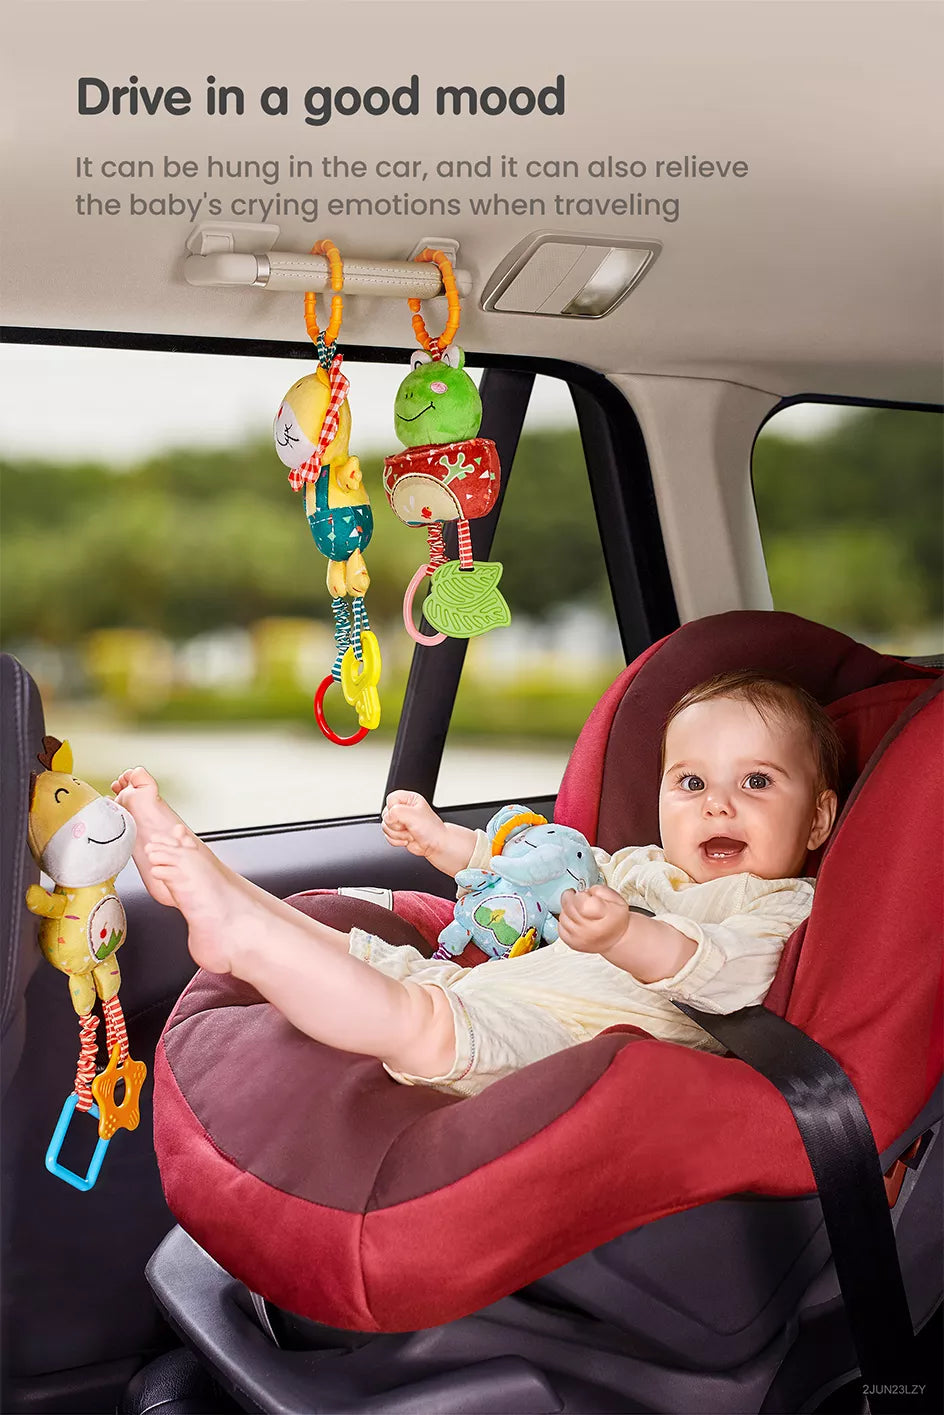 A baby sitting in a car looking at a frog lion toy hanging from the car